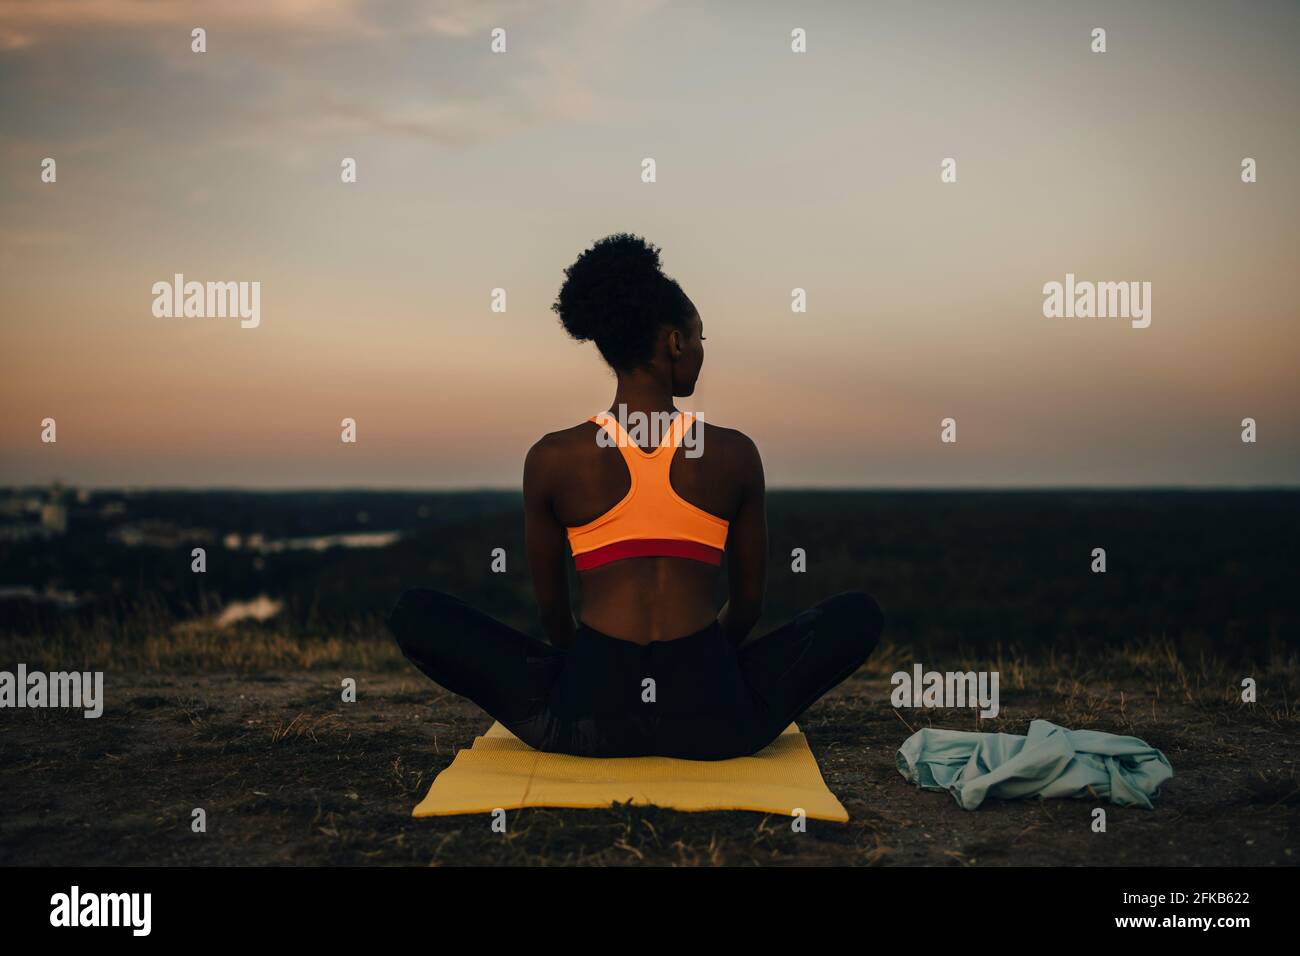 Rear view of sportswoman sitting on exercise mat during sunset Stock Photo